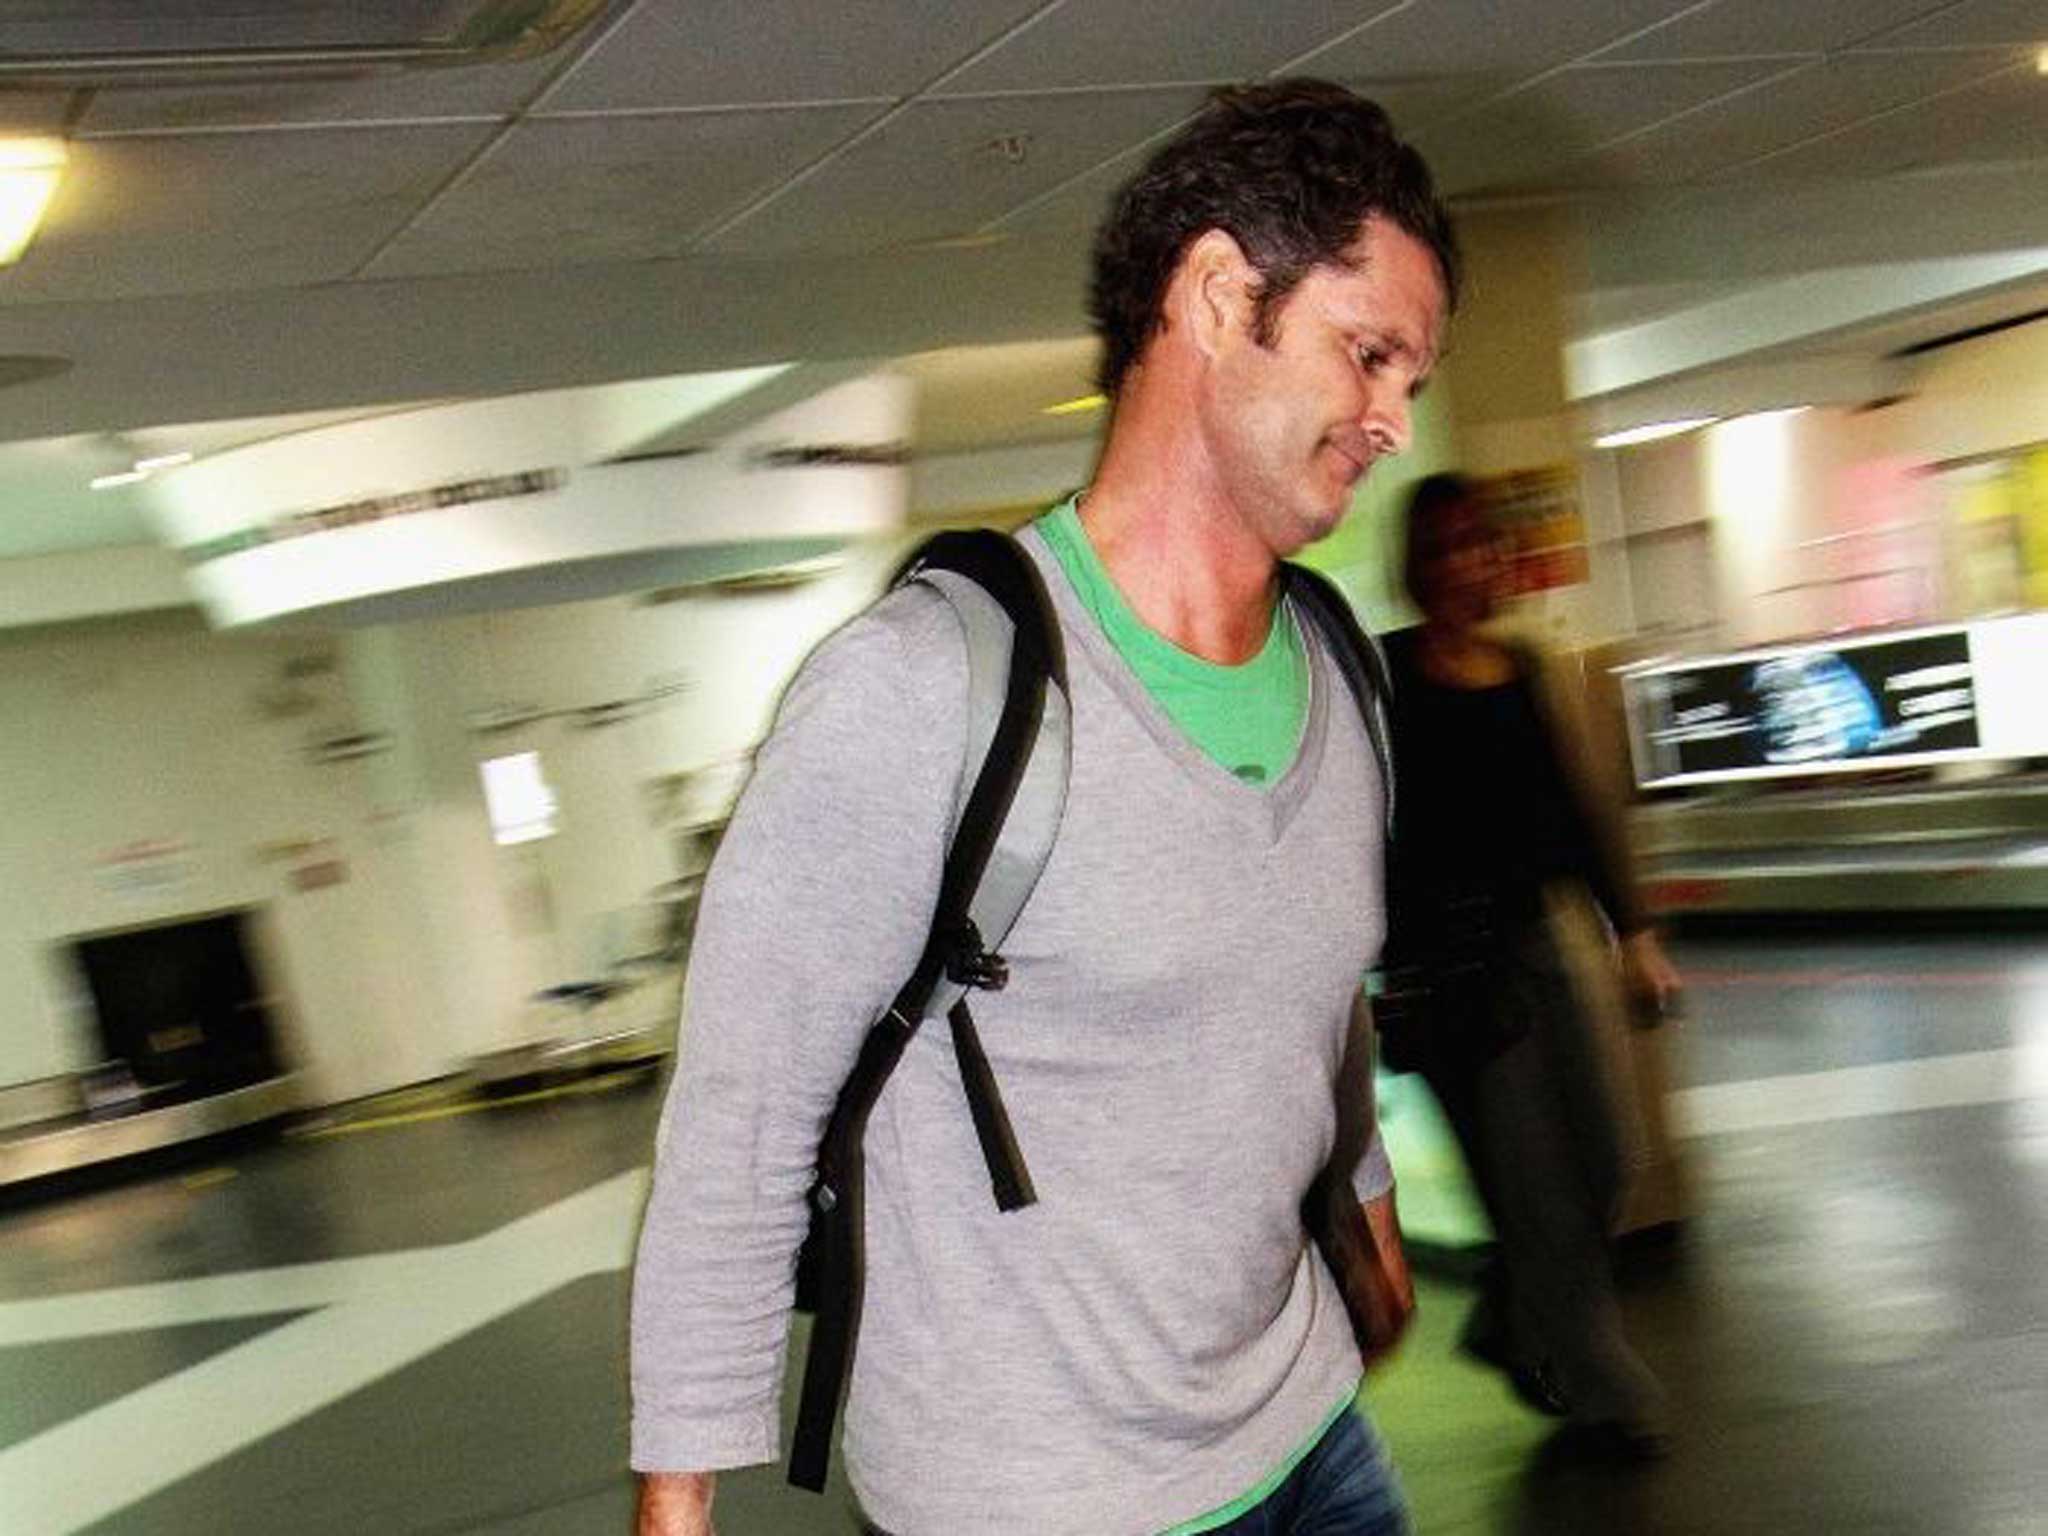 Former New Zealand cricketer Chris Cairns arrives at Auckland Airport